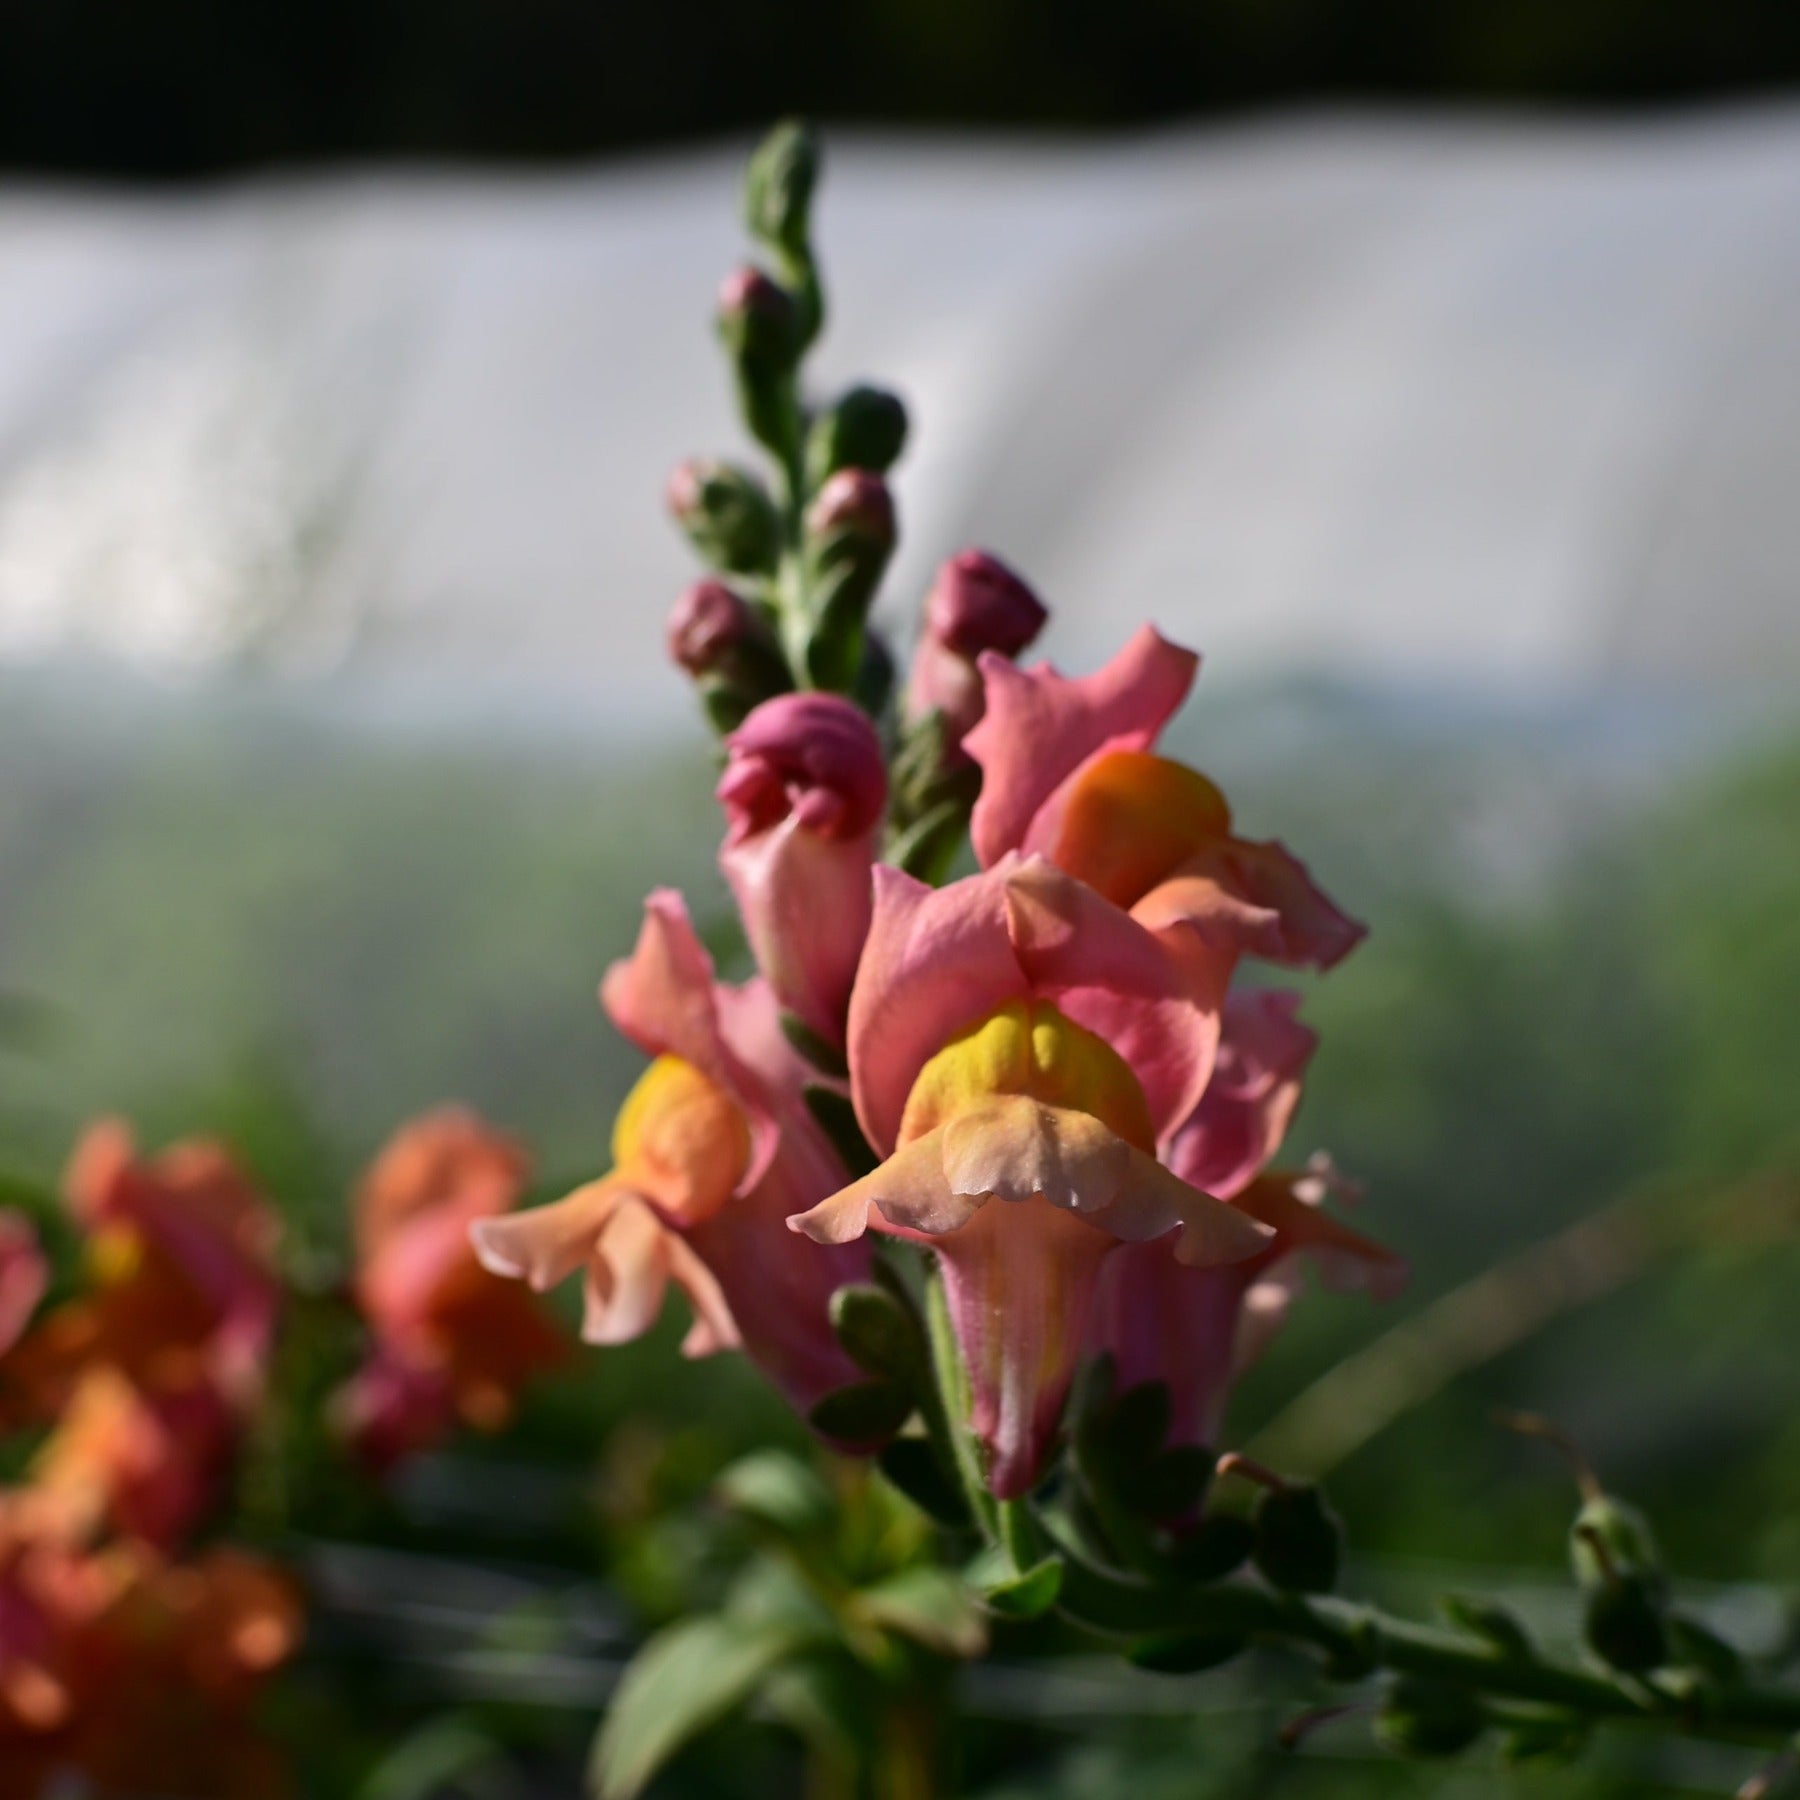 Orange wonder snapdragon blooms with a greenhouse in the background